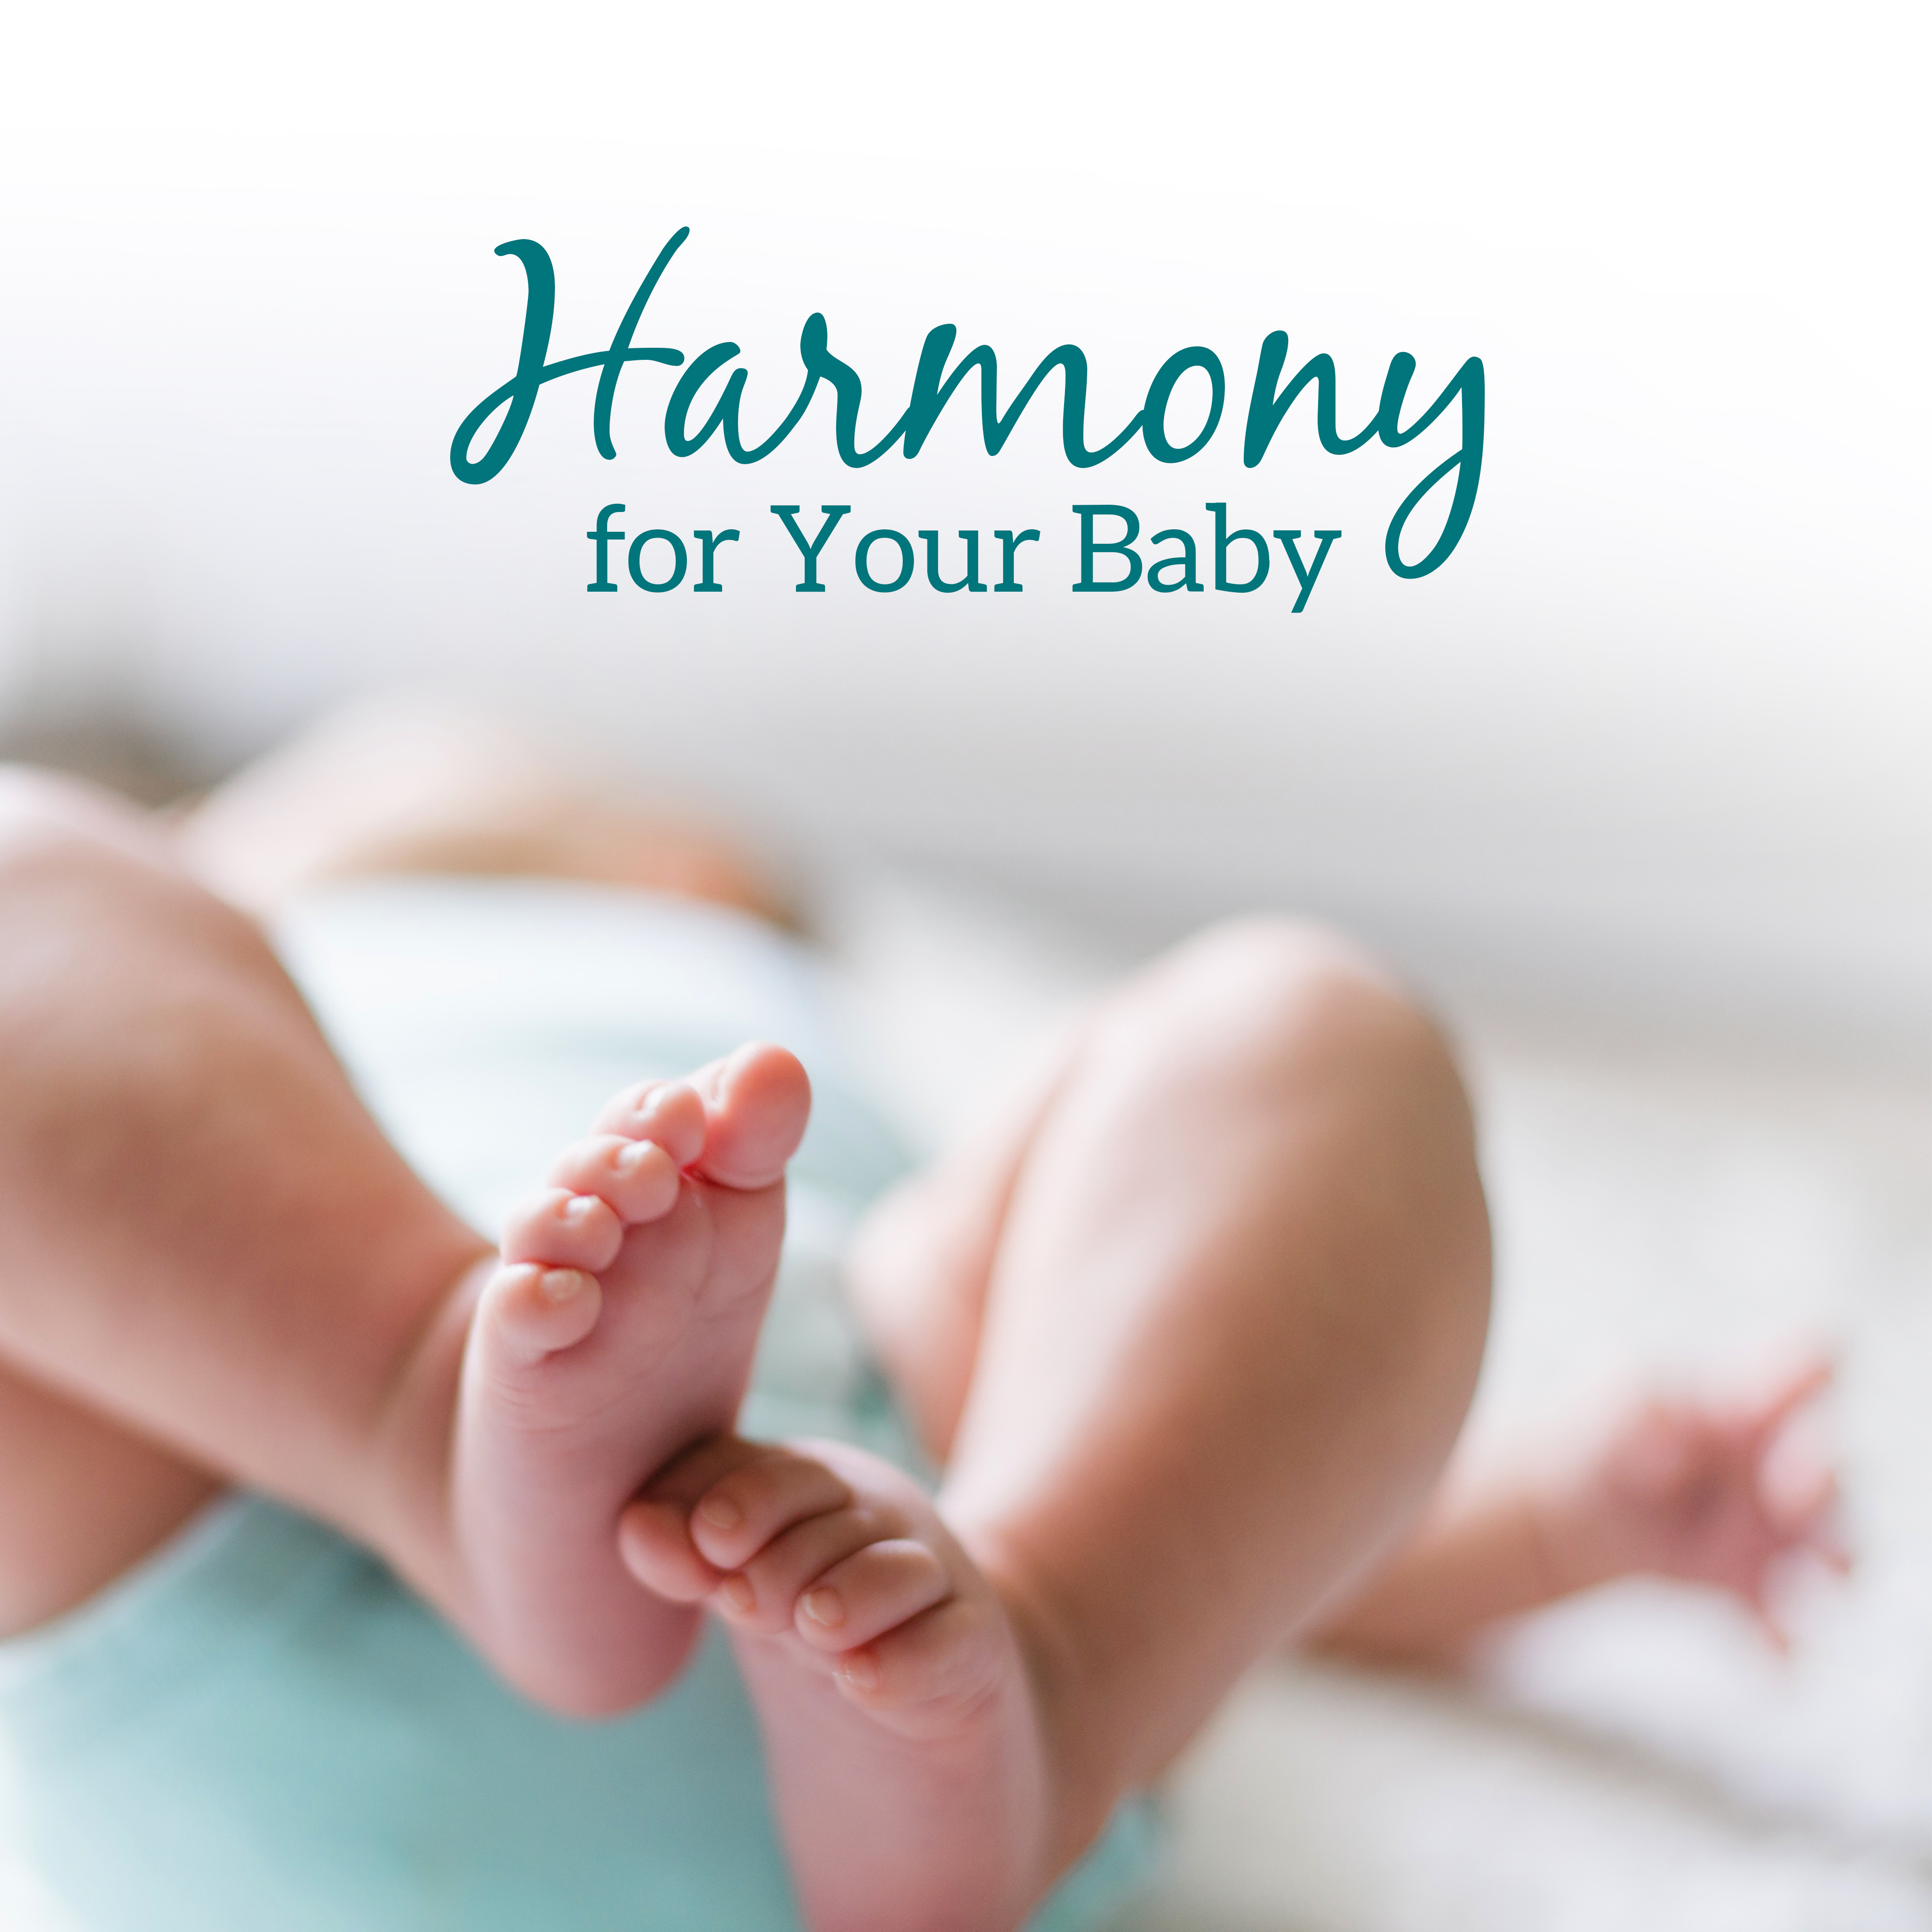 Harmony for Your Baby  Naptime, Soothing Melodies for Sleep, Calm Lullaby, Cradle Songs, Therapy Music